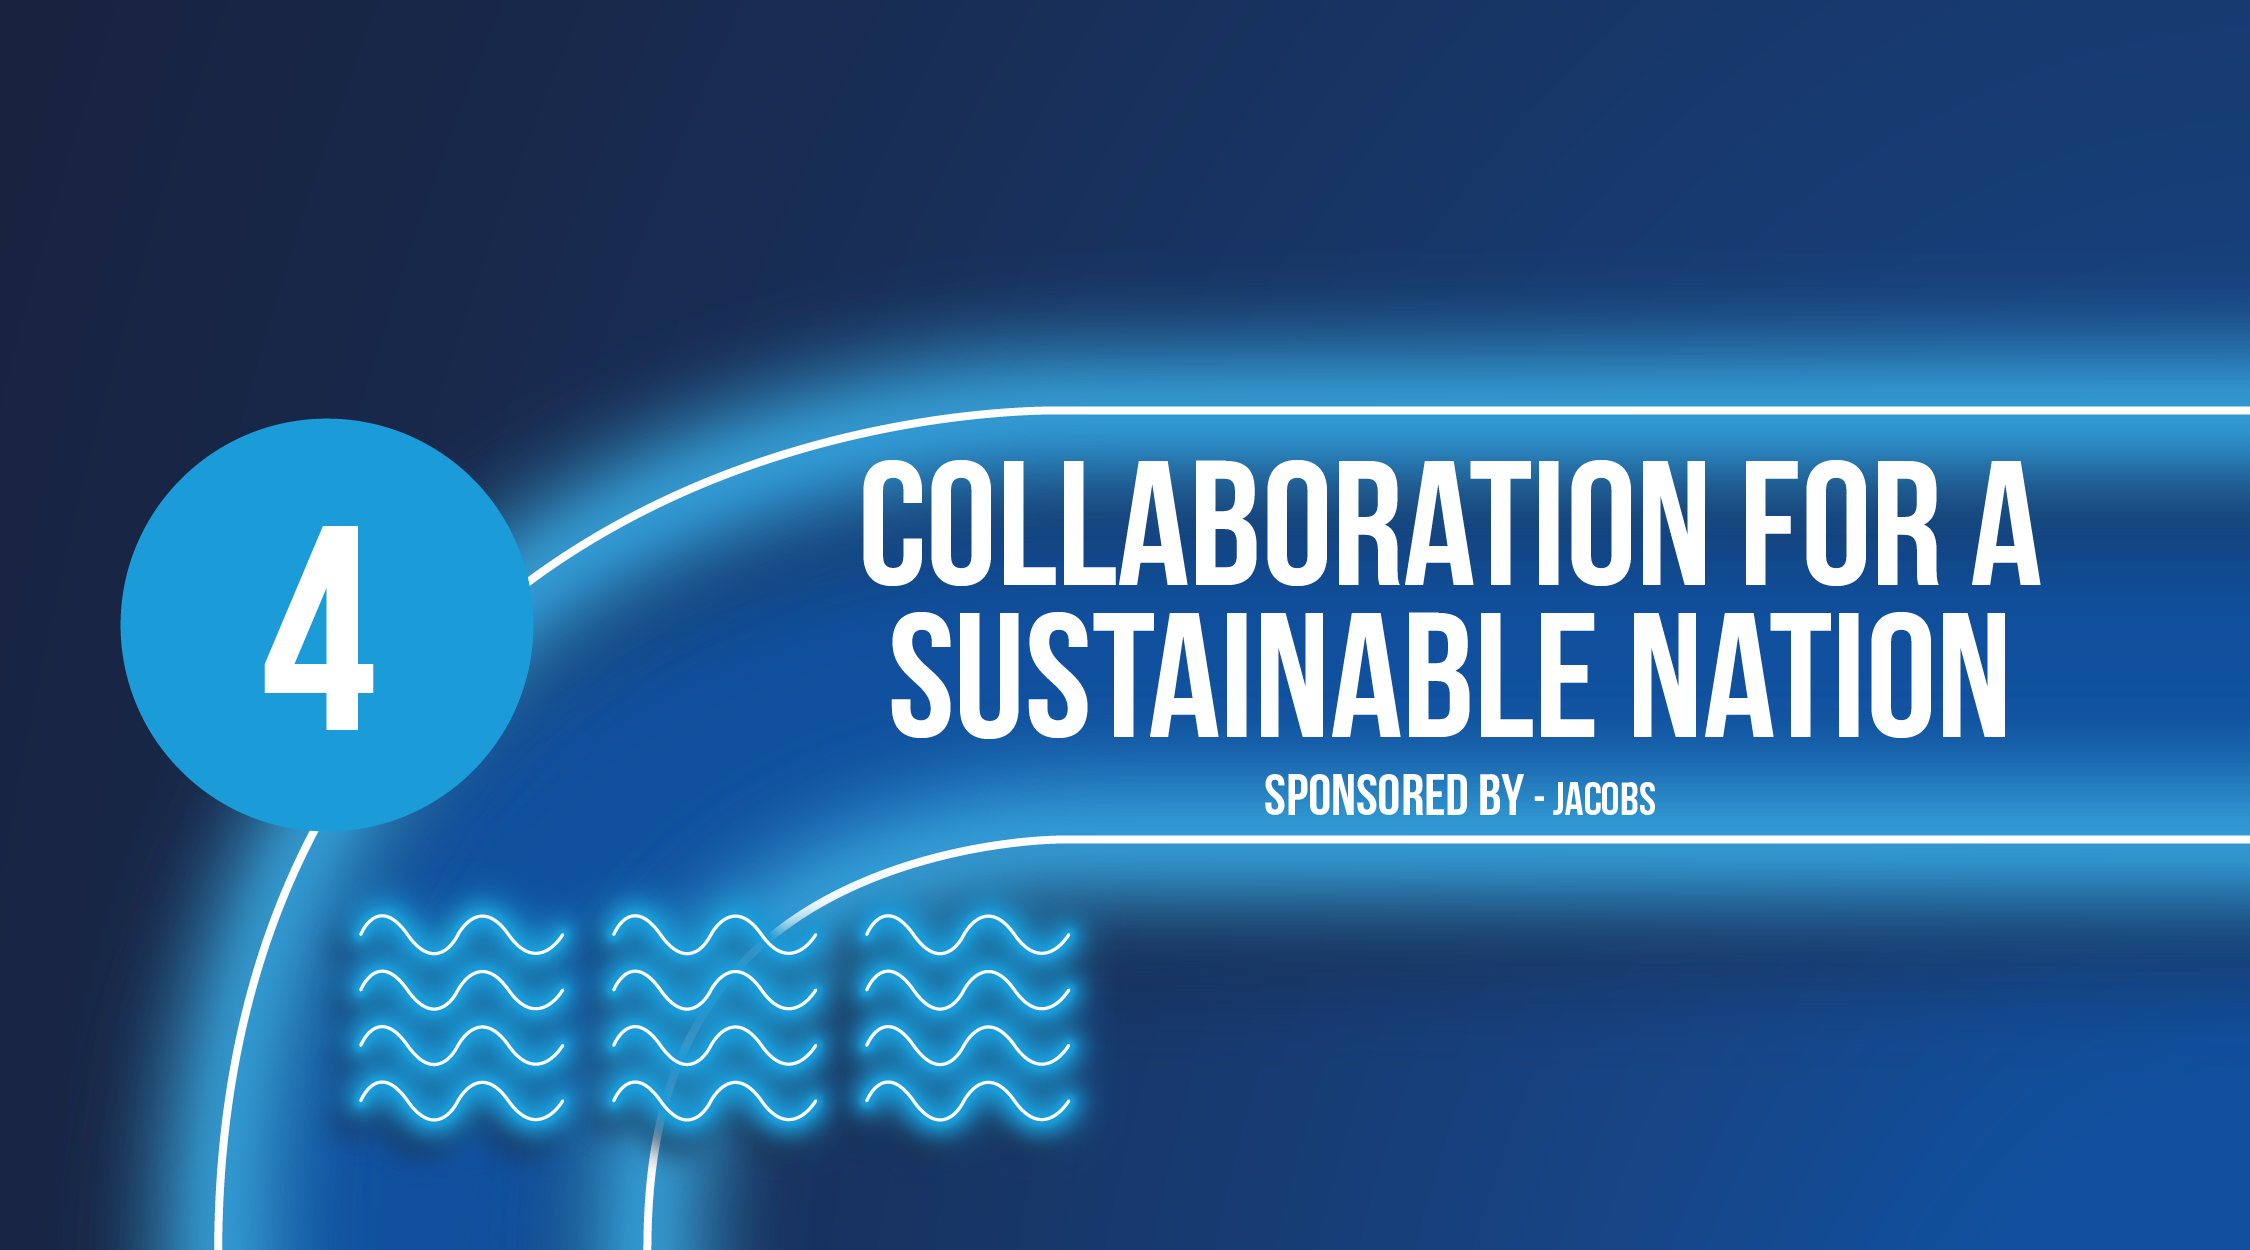 Collaboration for a sustainable nation